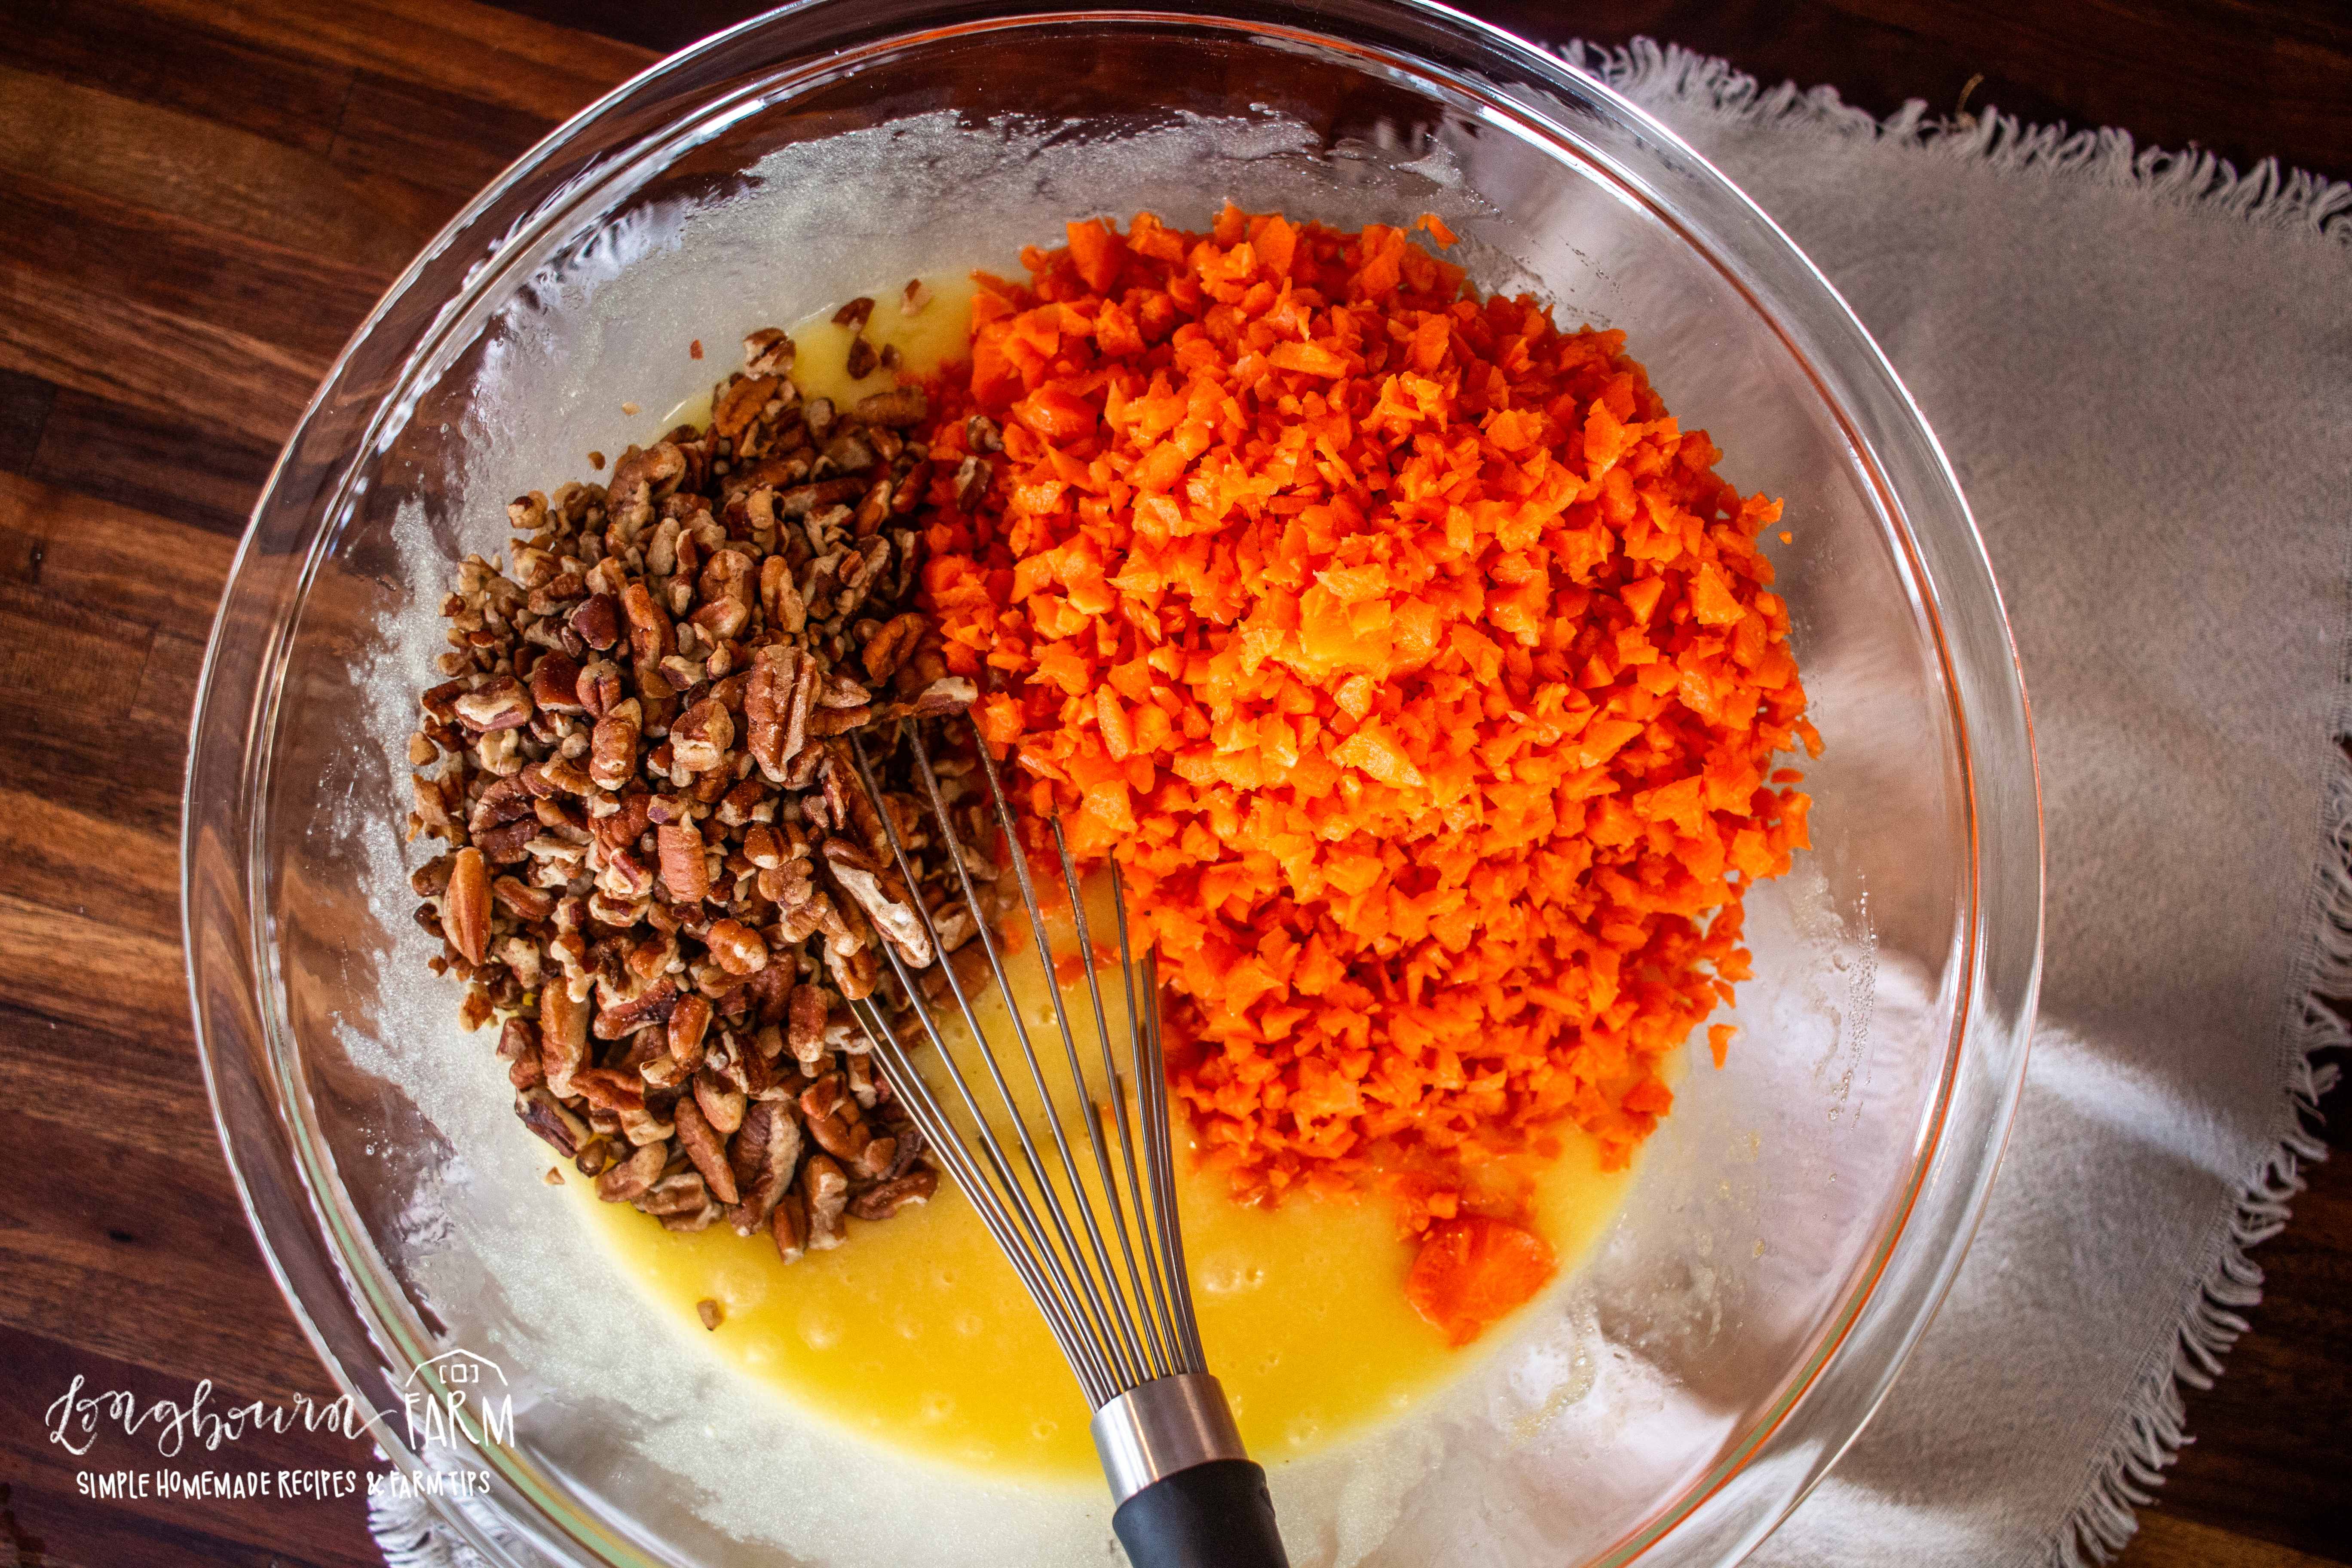 whisking grated carrot and walnuts into a bowl full whisked egg and sugar mixture for muffins